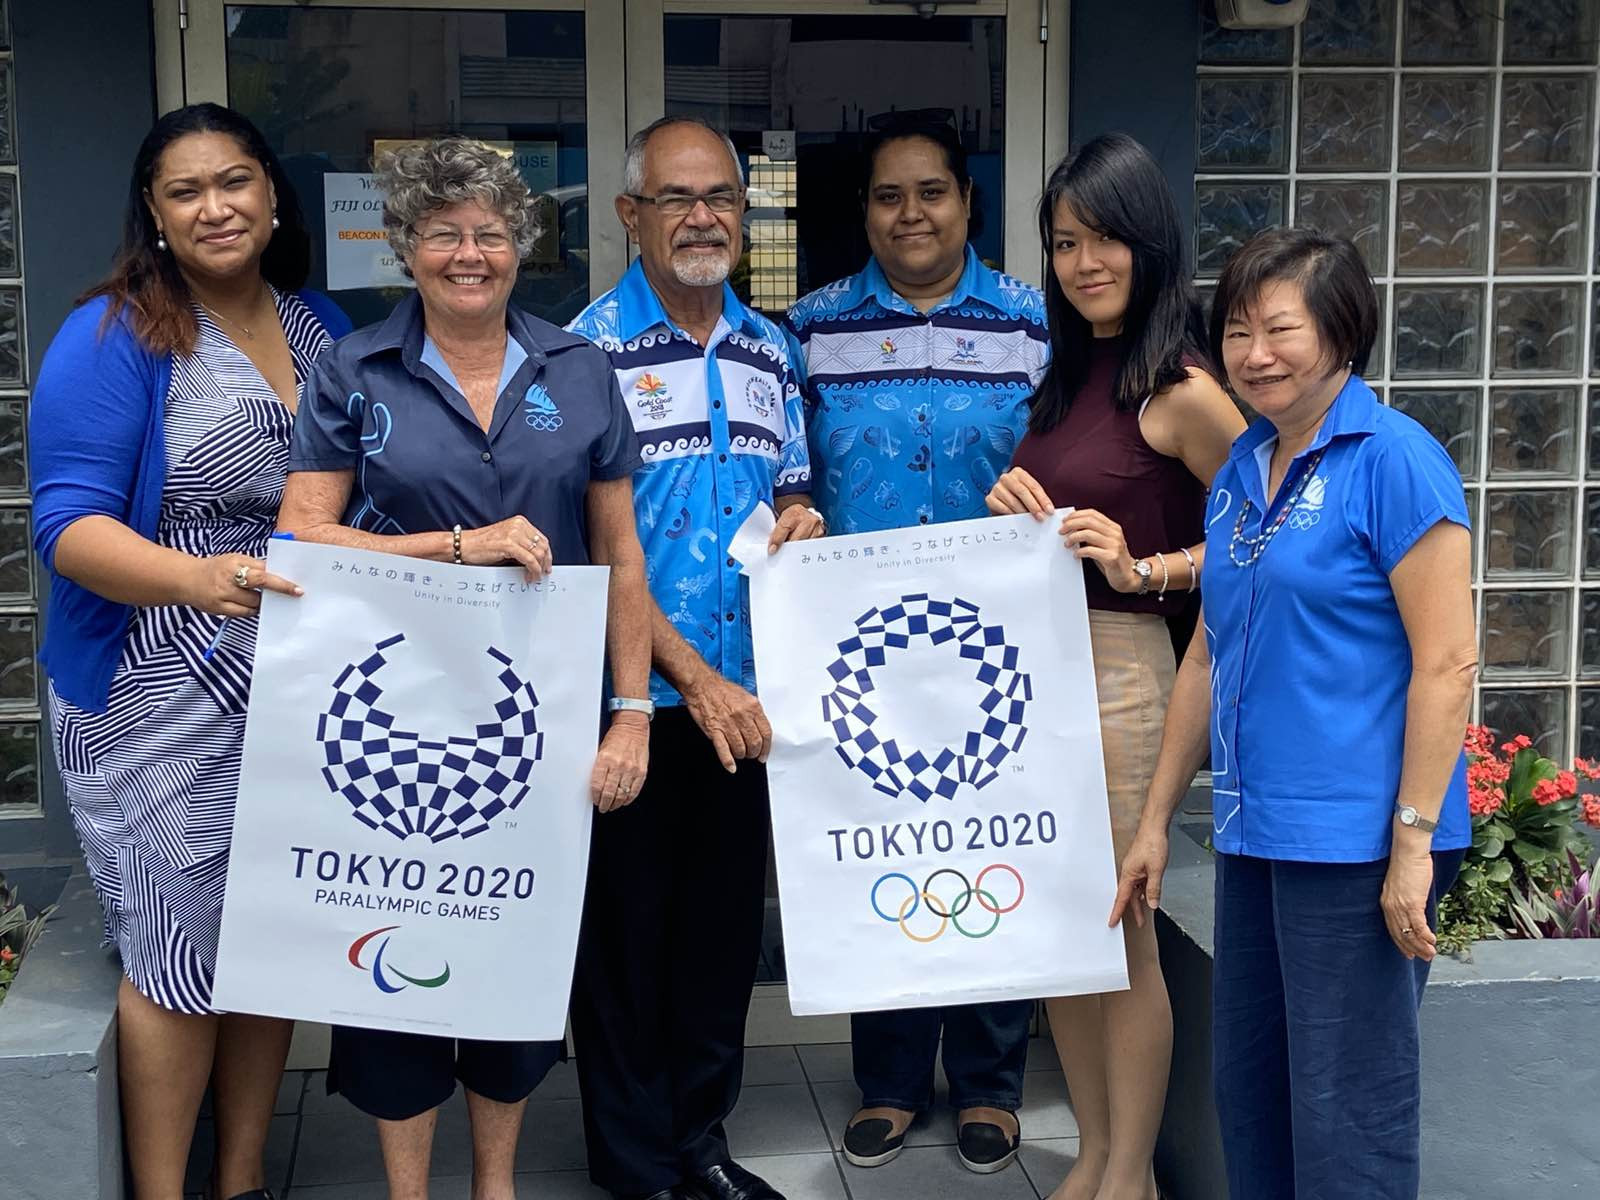 FASANOC hoping to send up to 50 athletes to Tokyo 2020